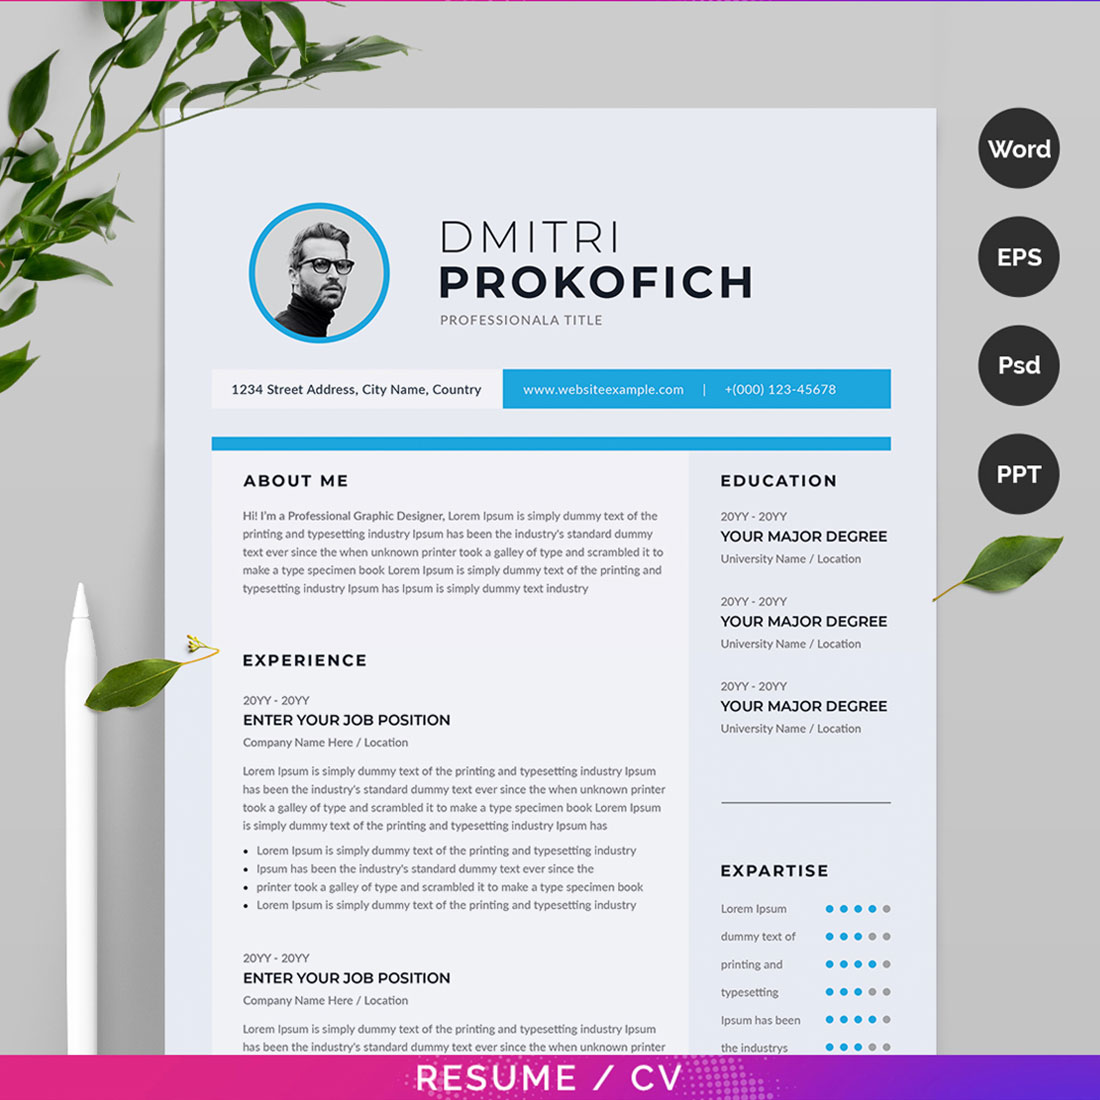 Professional resume template with a blue and white color scheme.